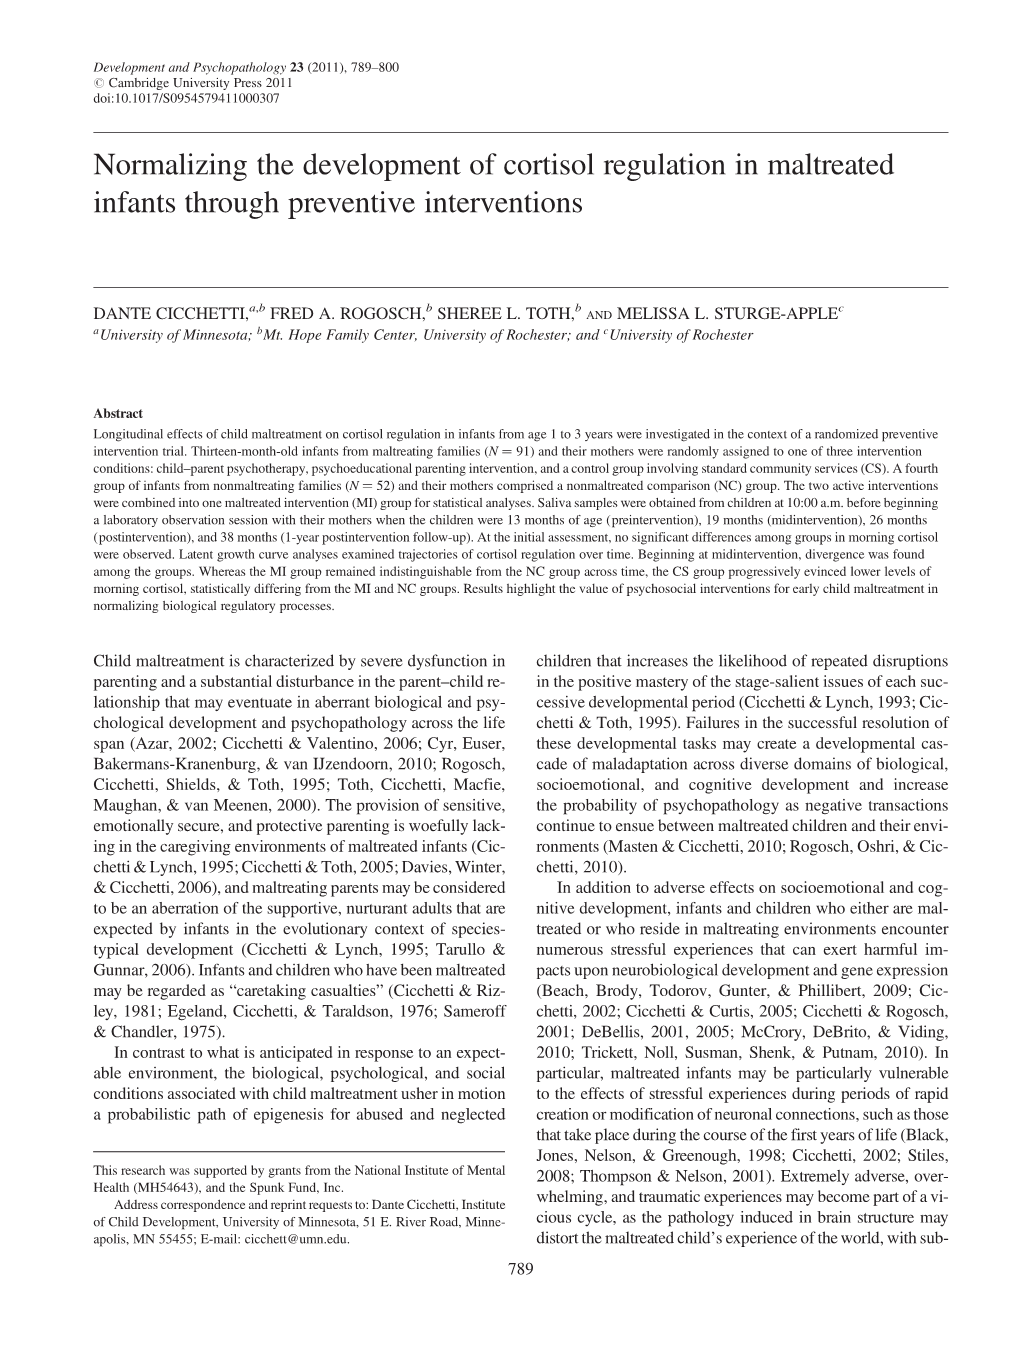 Normalizing the Development of Cortisol Regulation in Maltreated Infants Through Preventive Interventions